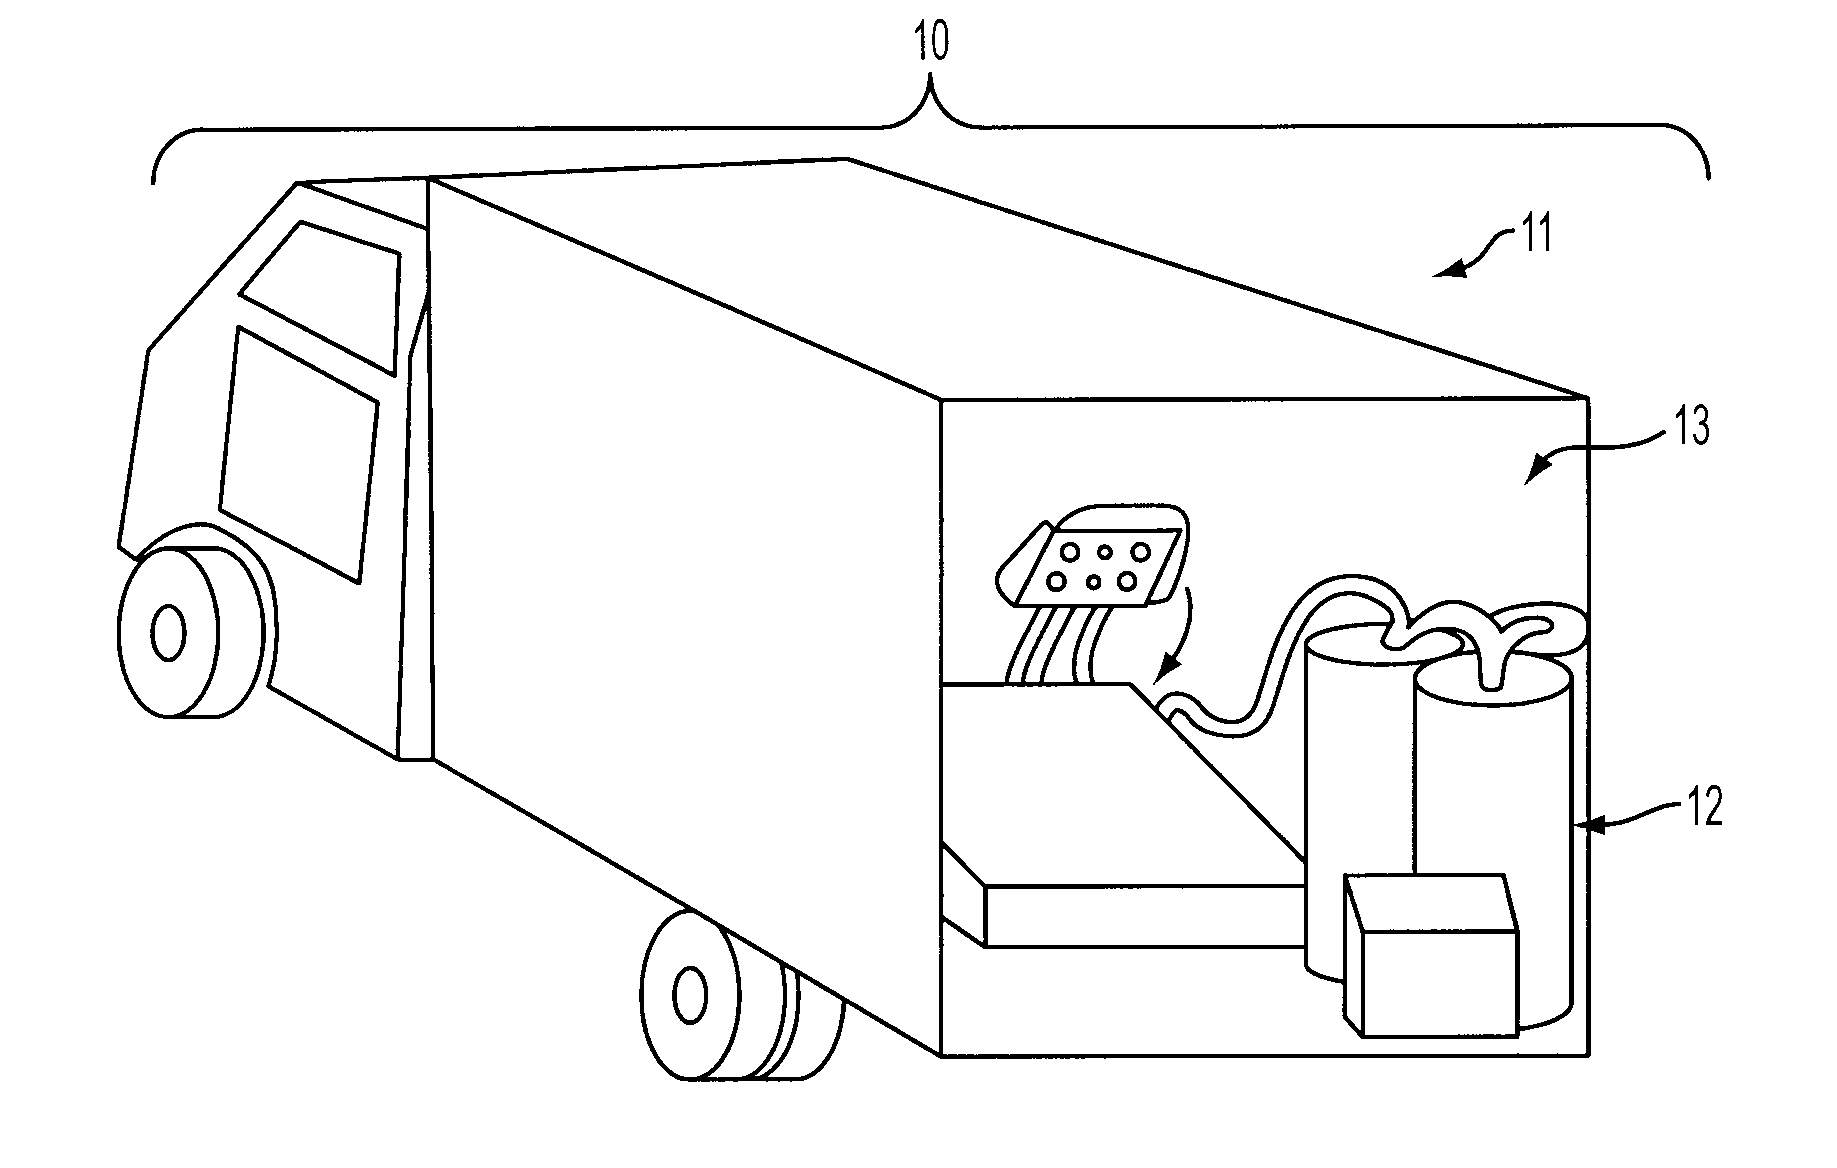 Home furnishing system treatment and method